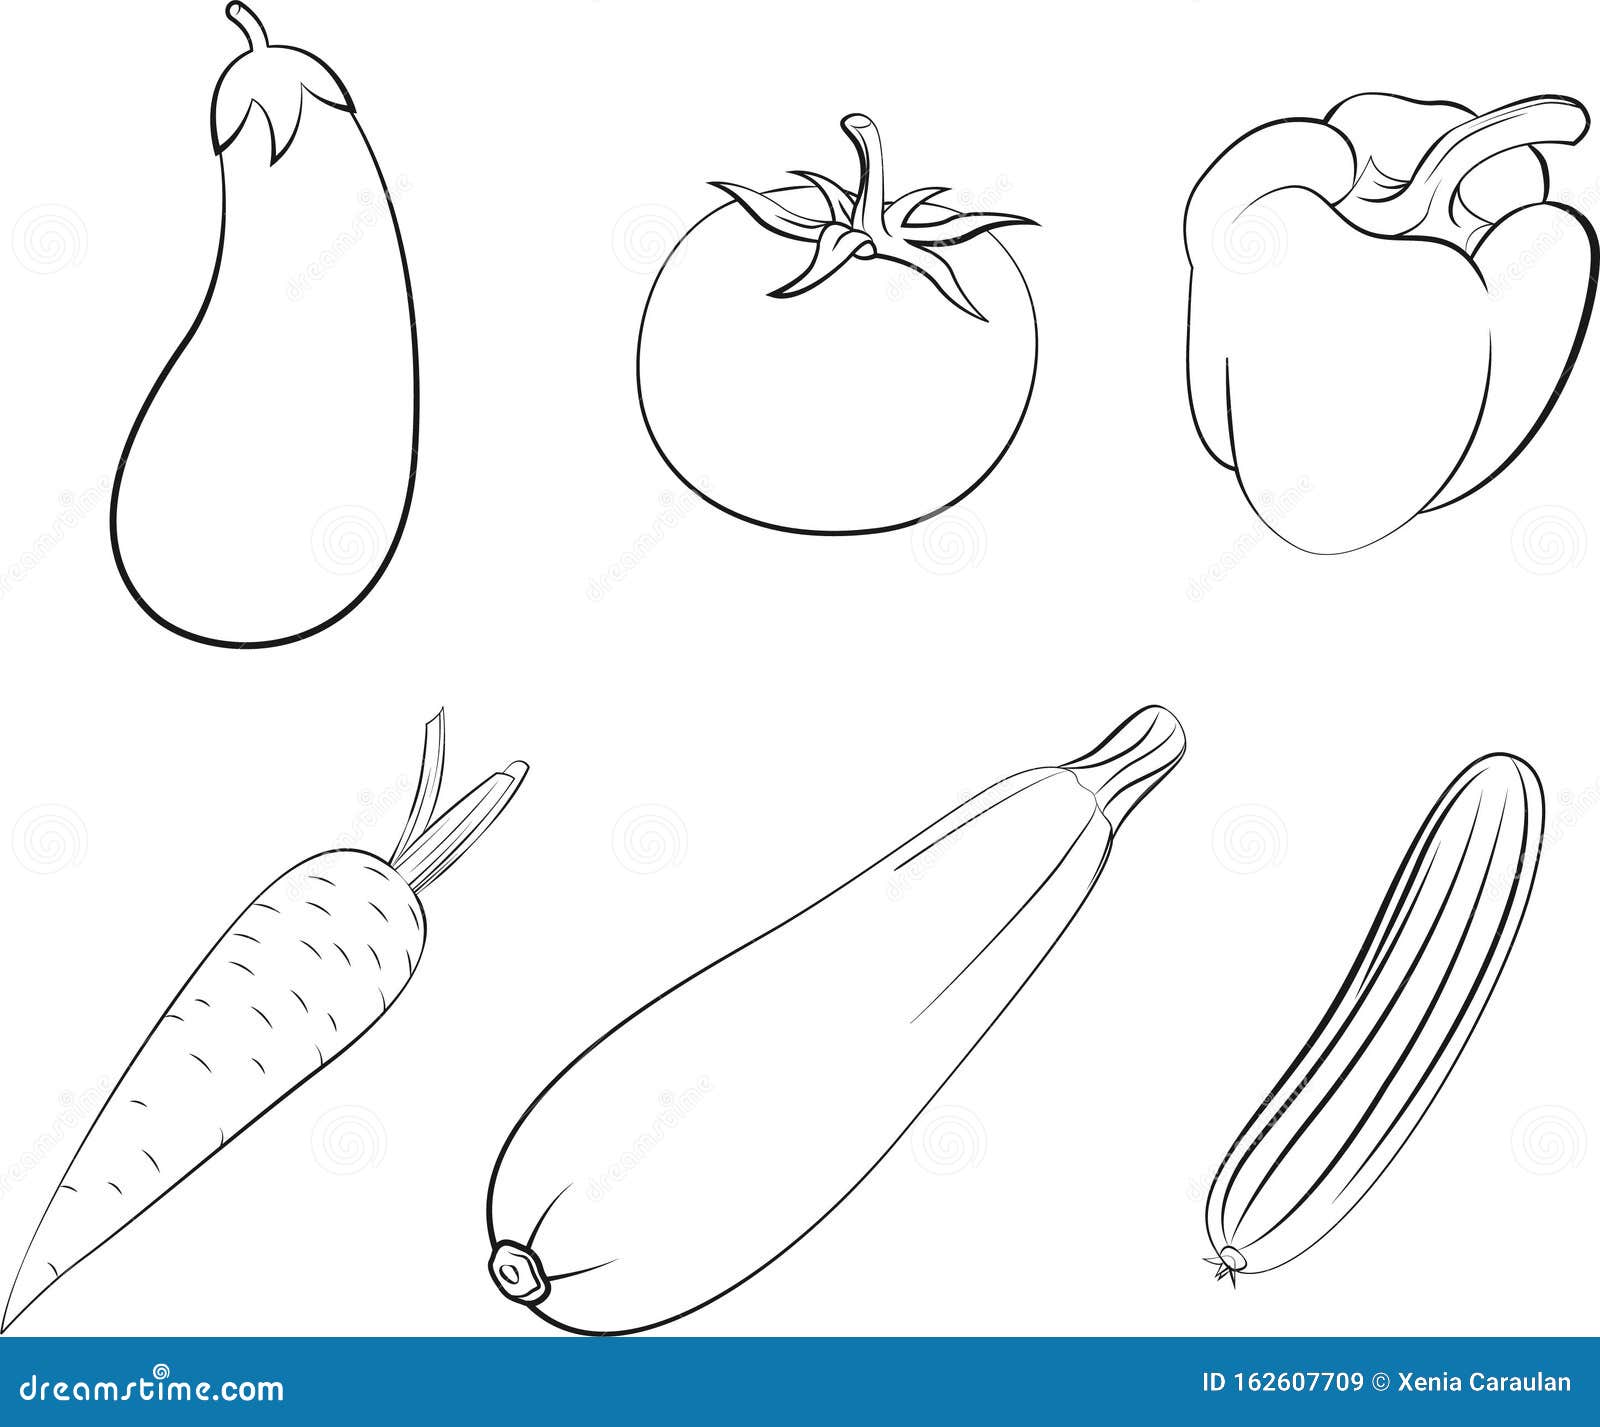 Coloring Page And Illustration Of Vegetables Set Of Vegetables Eggplant Tomato Pepper Carrot Squash And Cucumber In Vector Stock Vector Illustration Of Colorful Collection 162607709